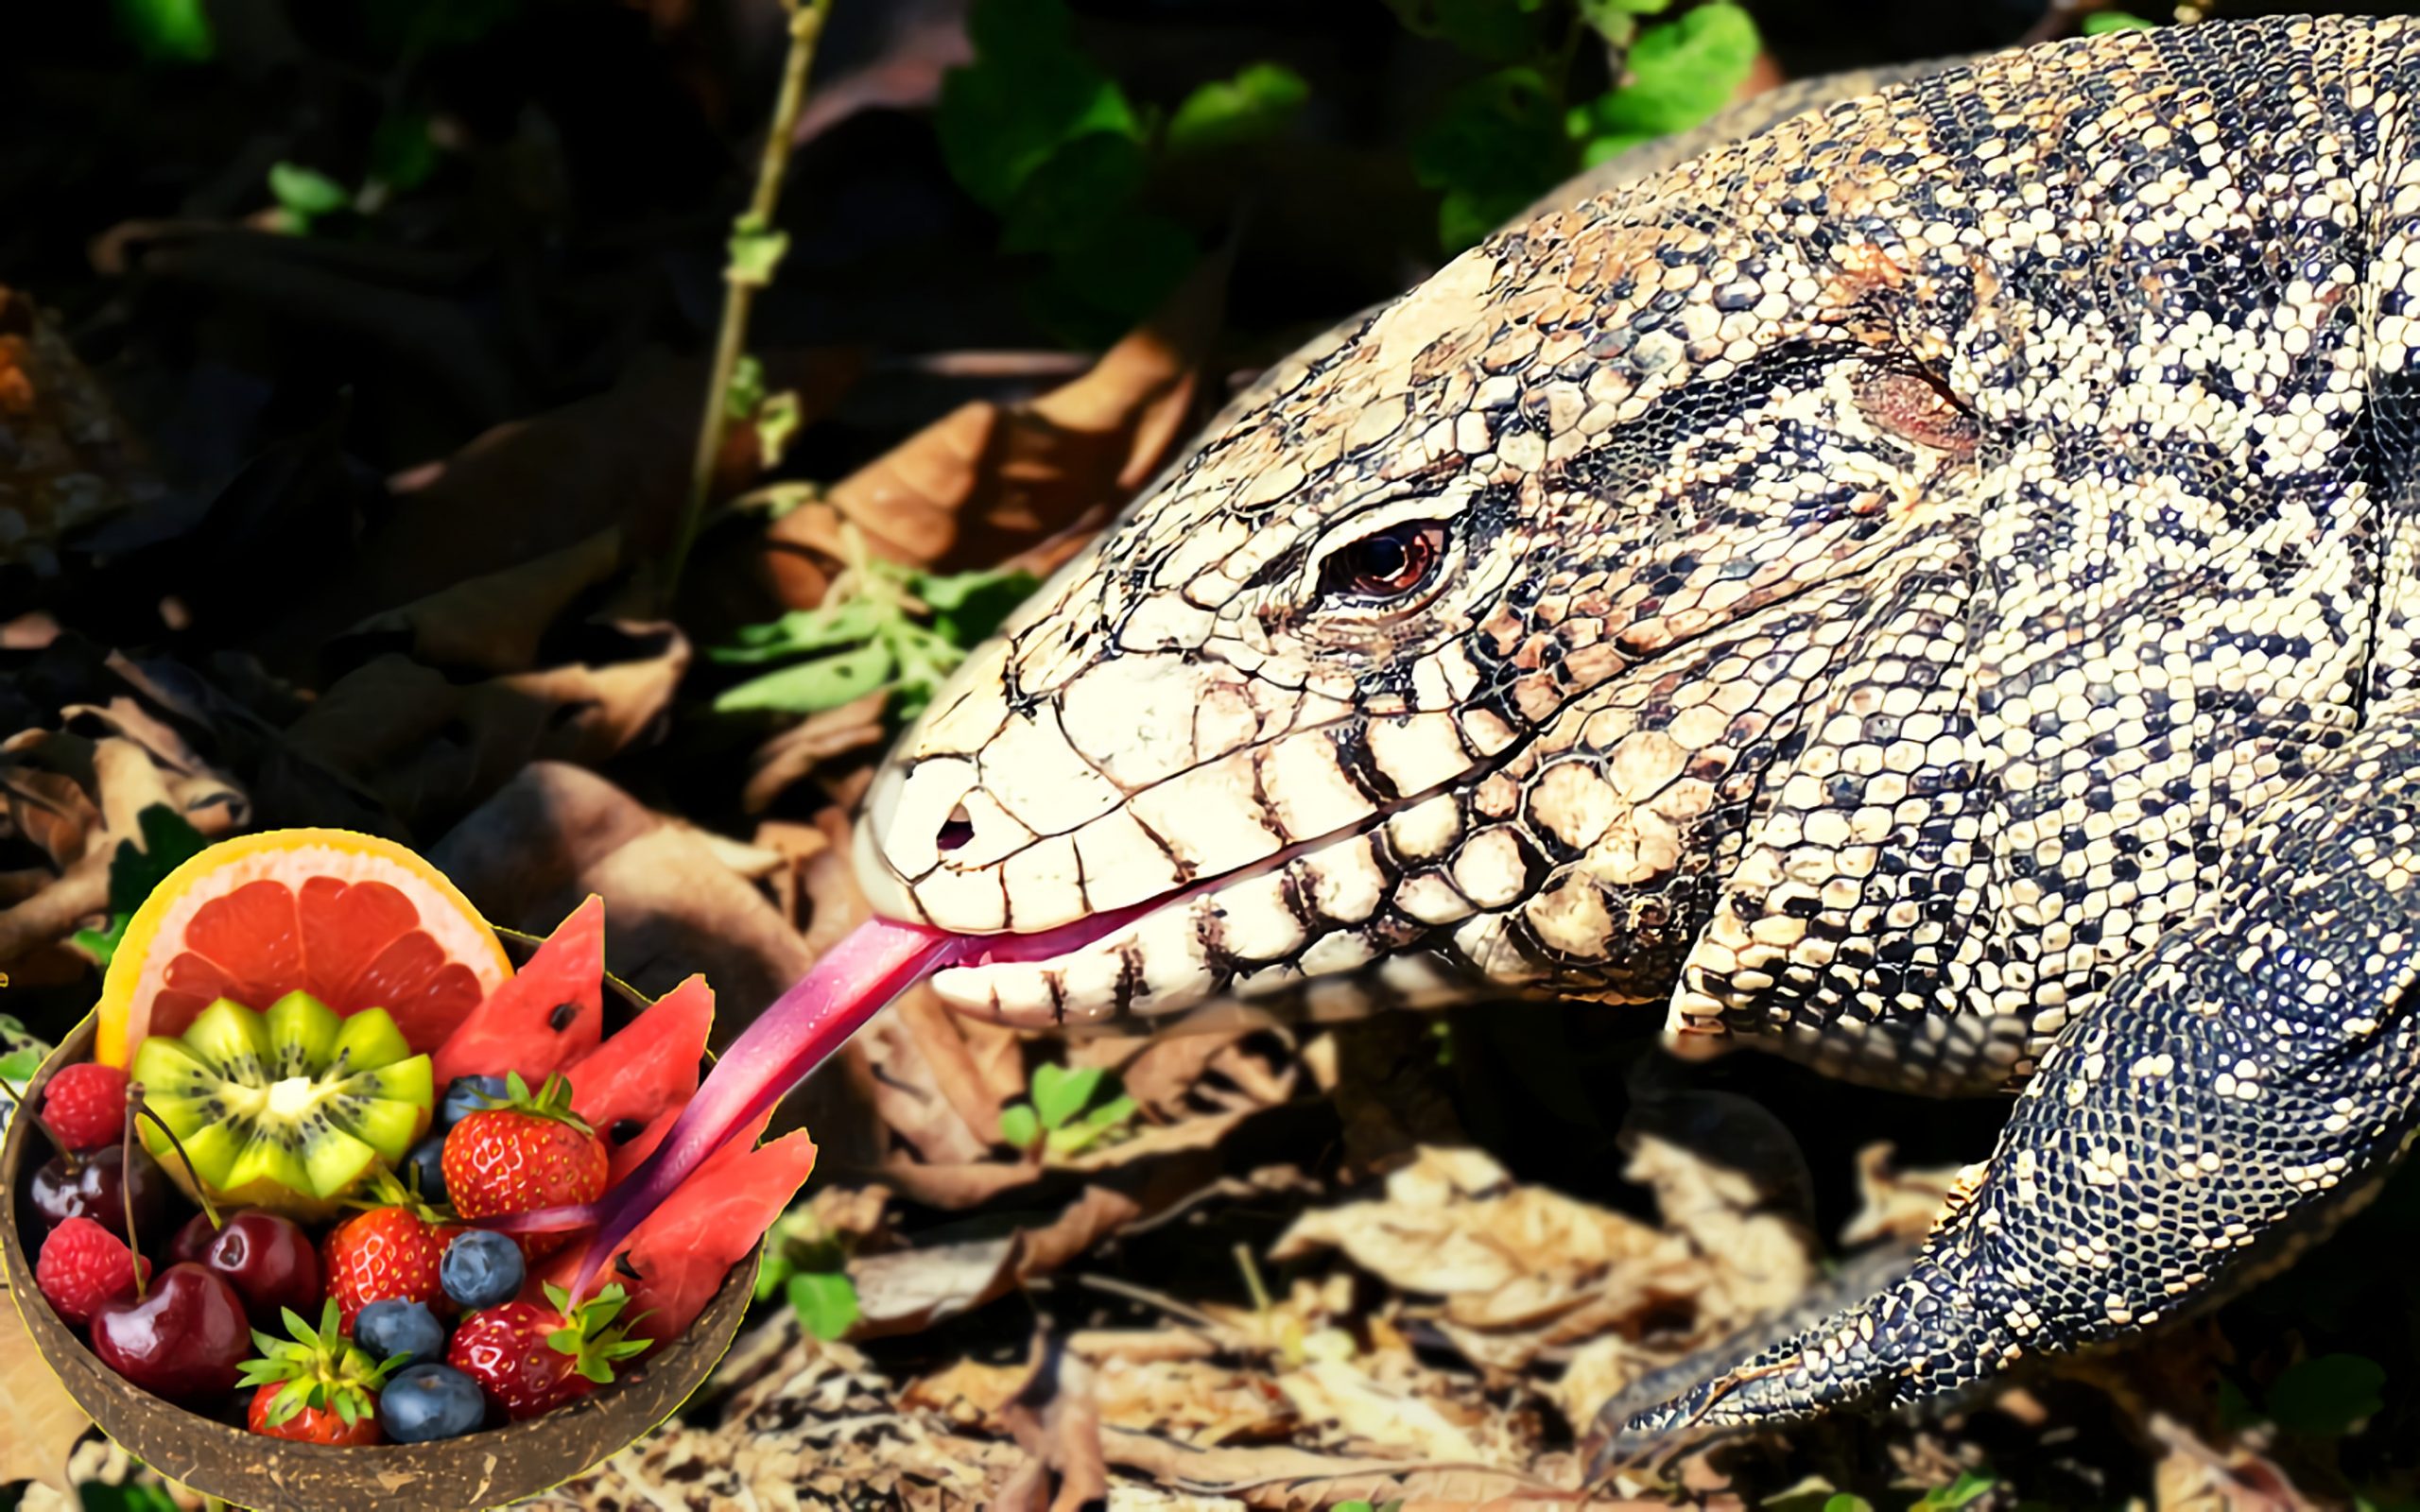 Tegu eating a bowl of fruits and berries